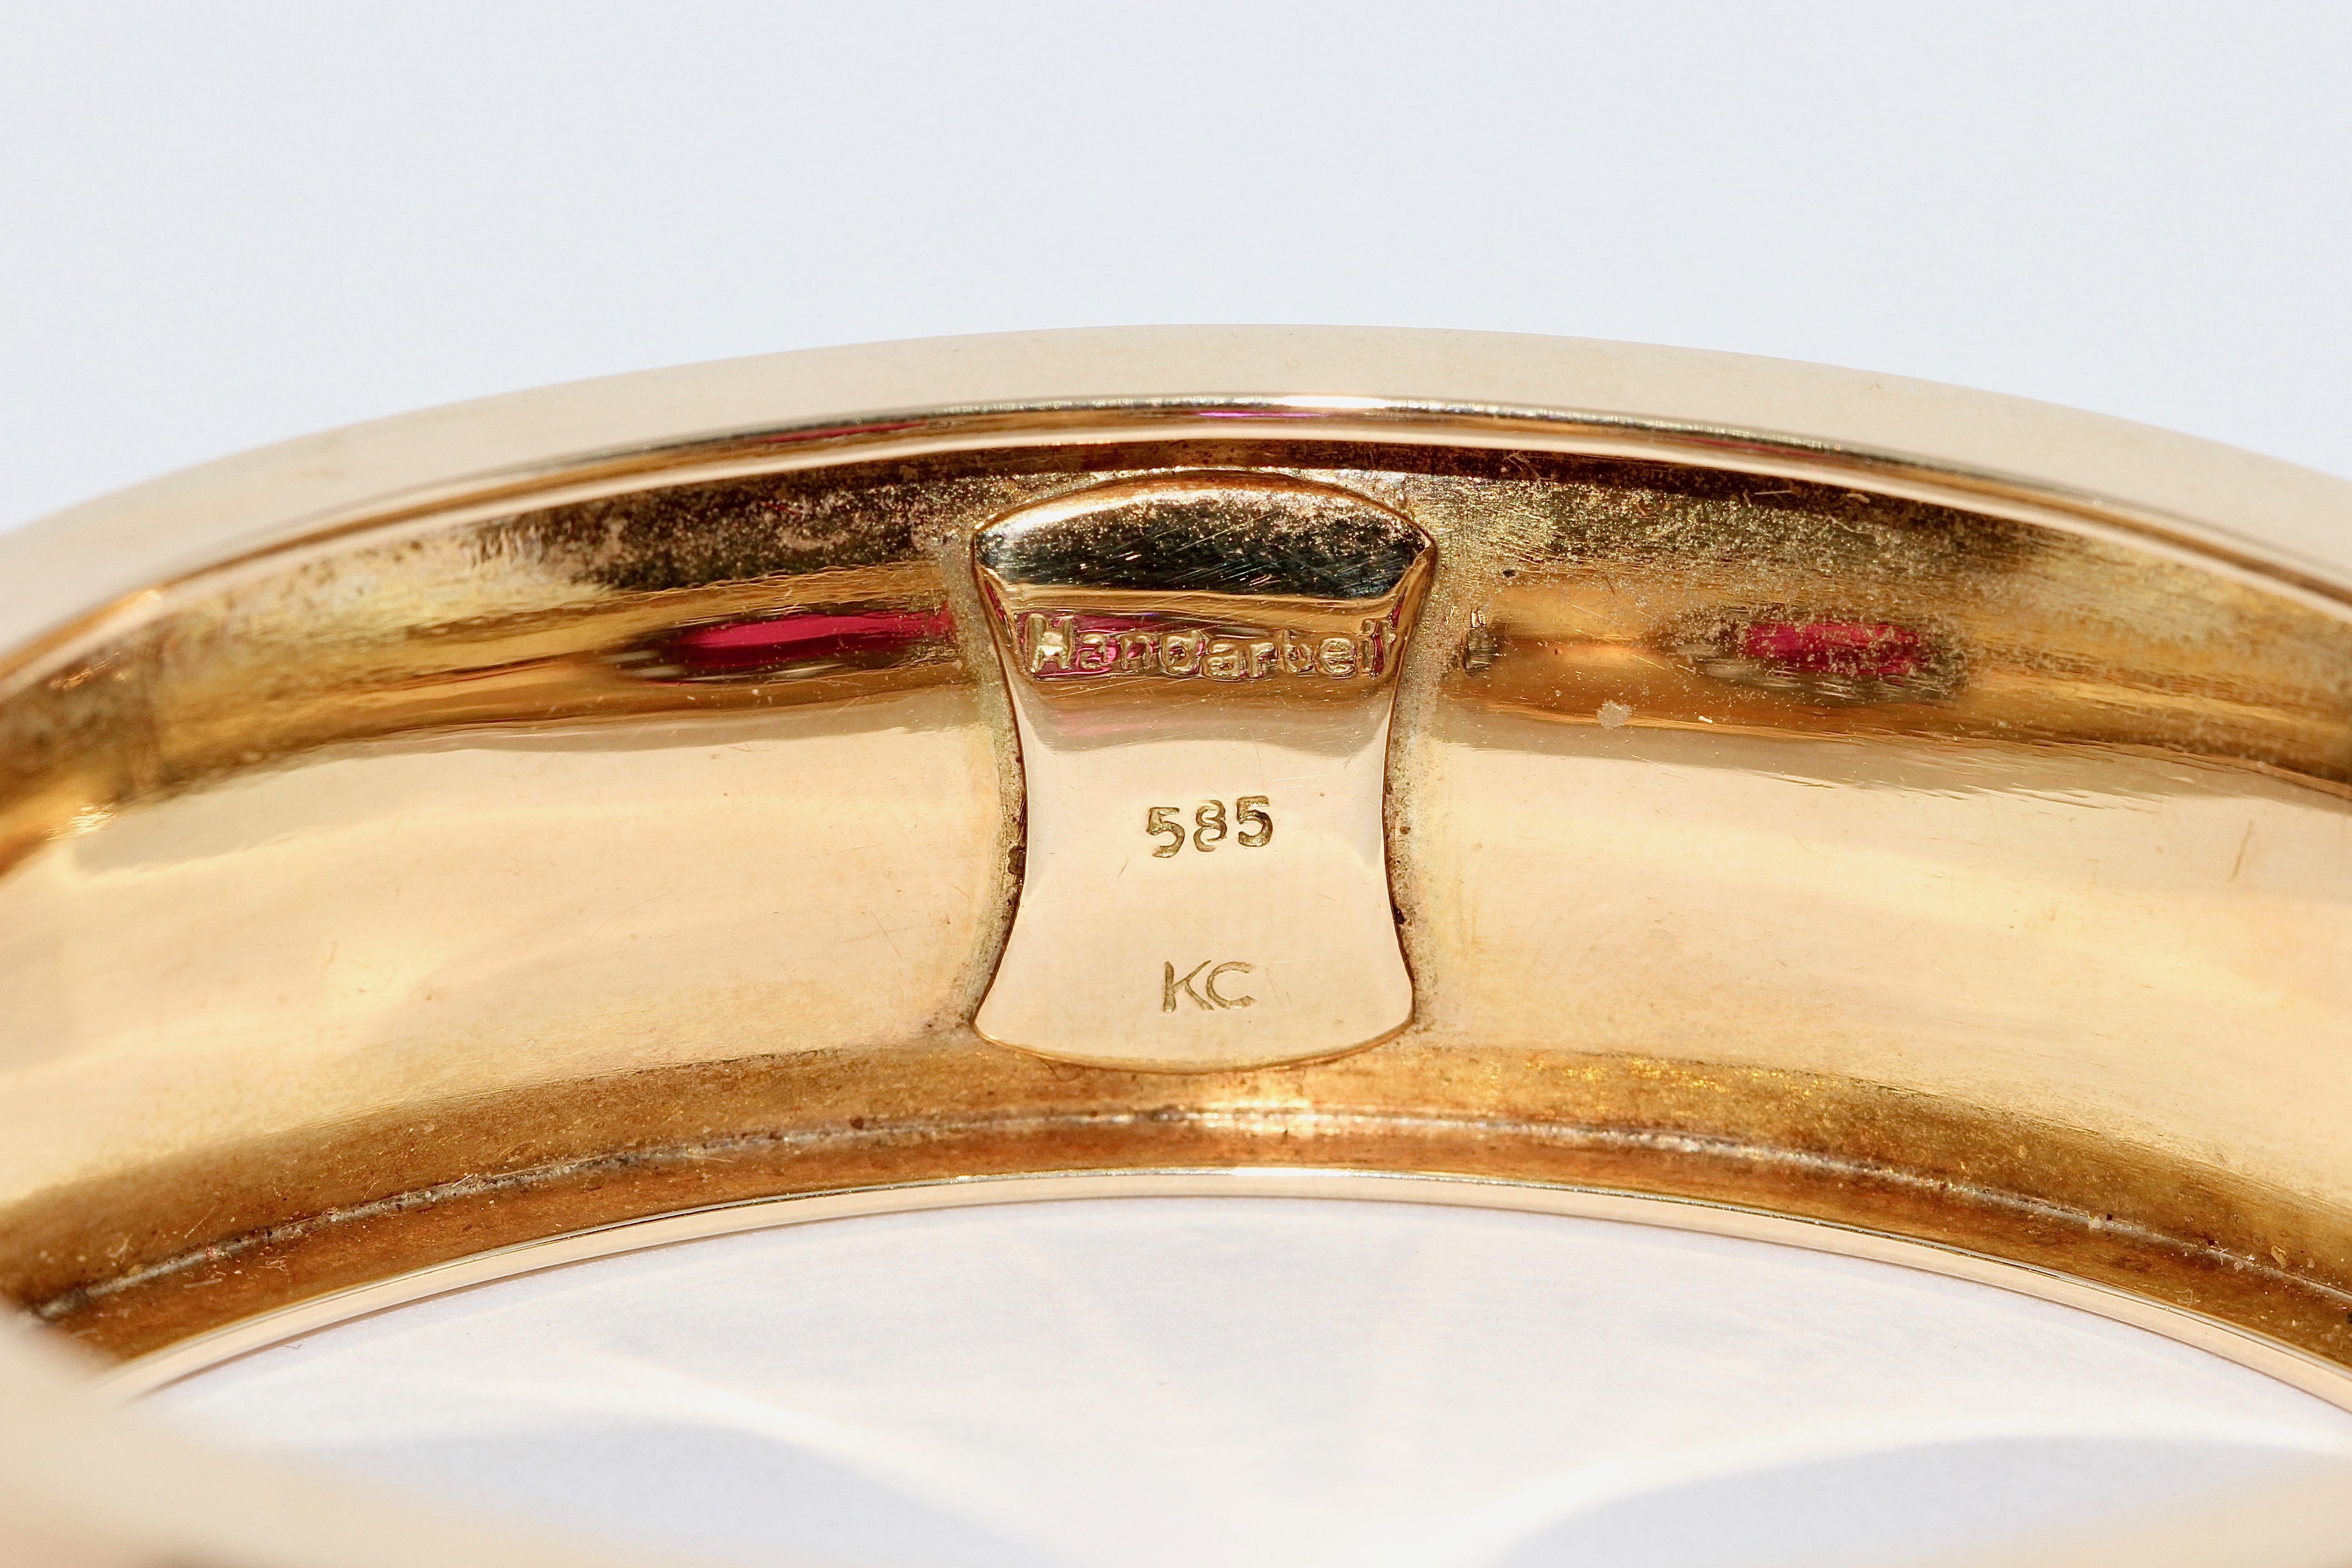 Antique Ladies Bangle, Bracelet, with Big Rubies and Diamonds, 14 Karat Gold In Good Condition For Sale In Berlin, DE